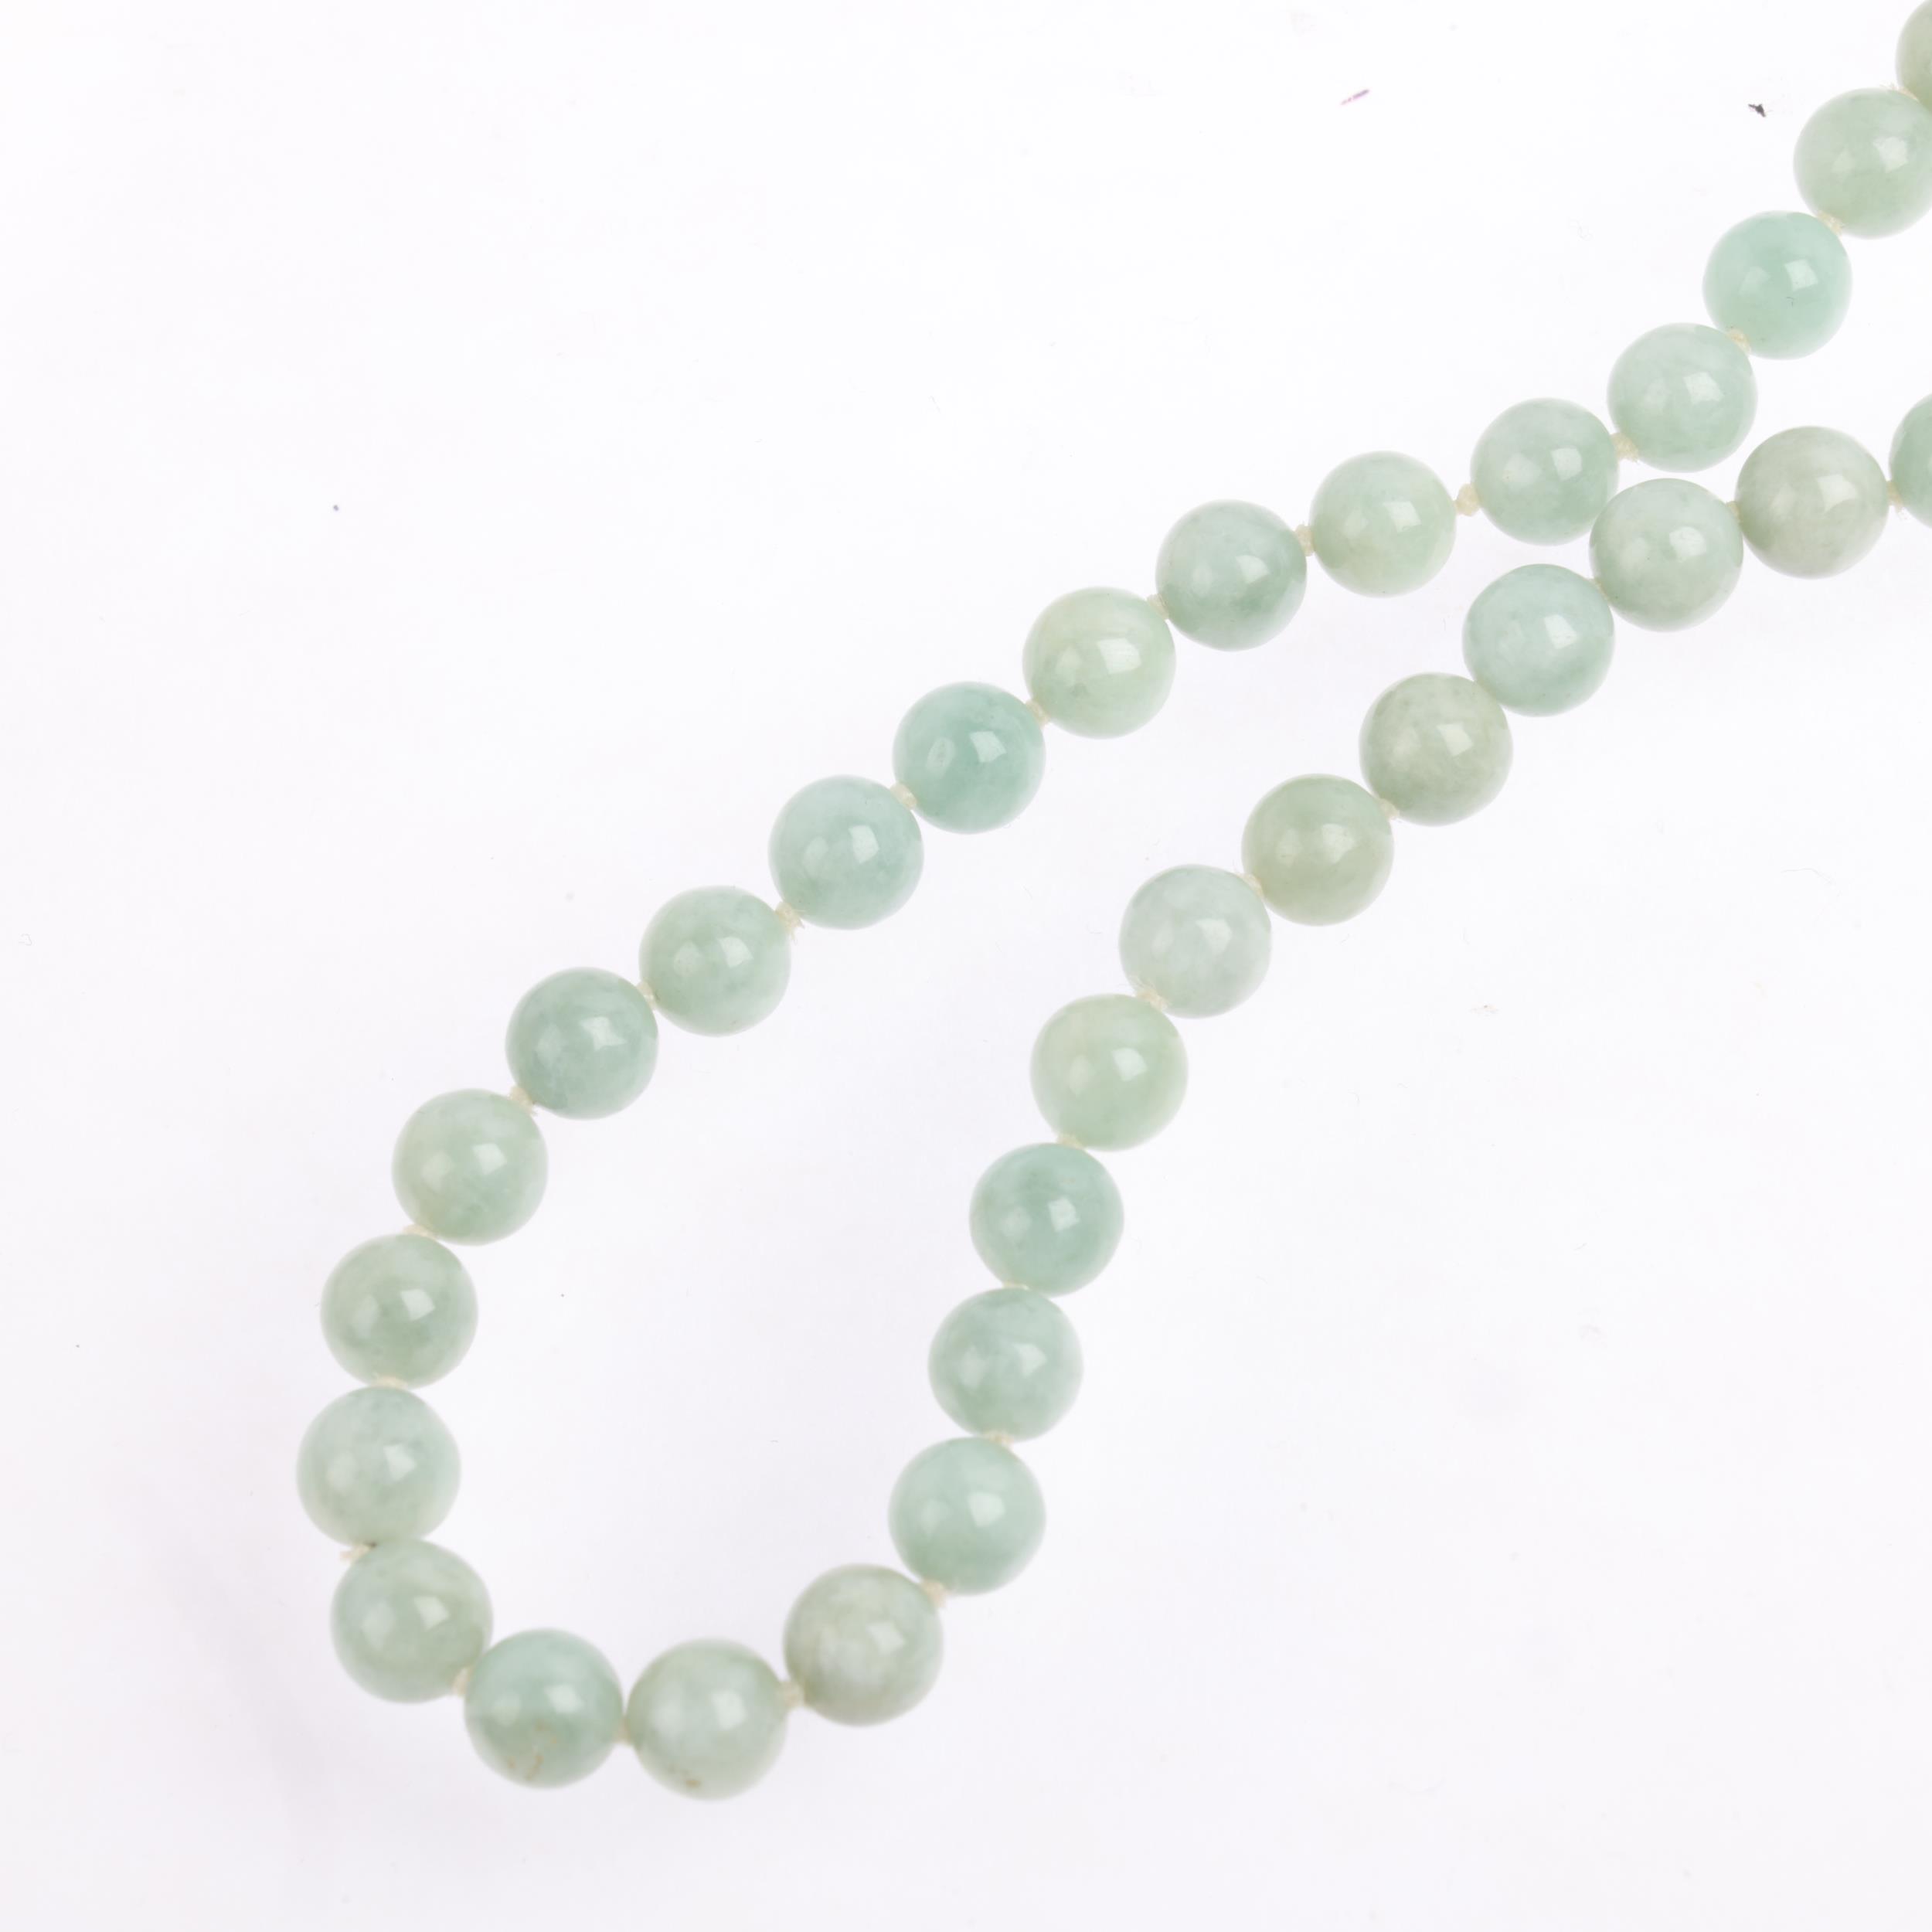 A single-row polished jade bead necklace, with 14ct gold clasp, beads measure 6.1mm, 44cm, 27.3g - Image 3 of 4